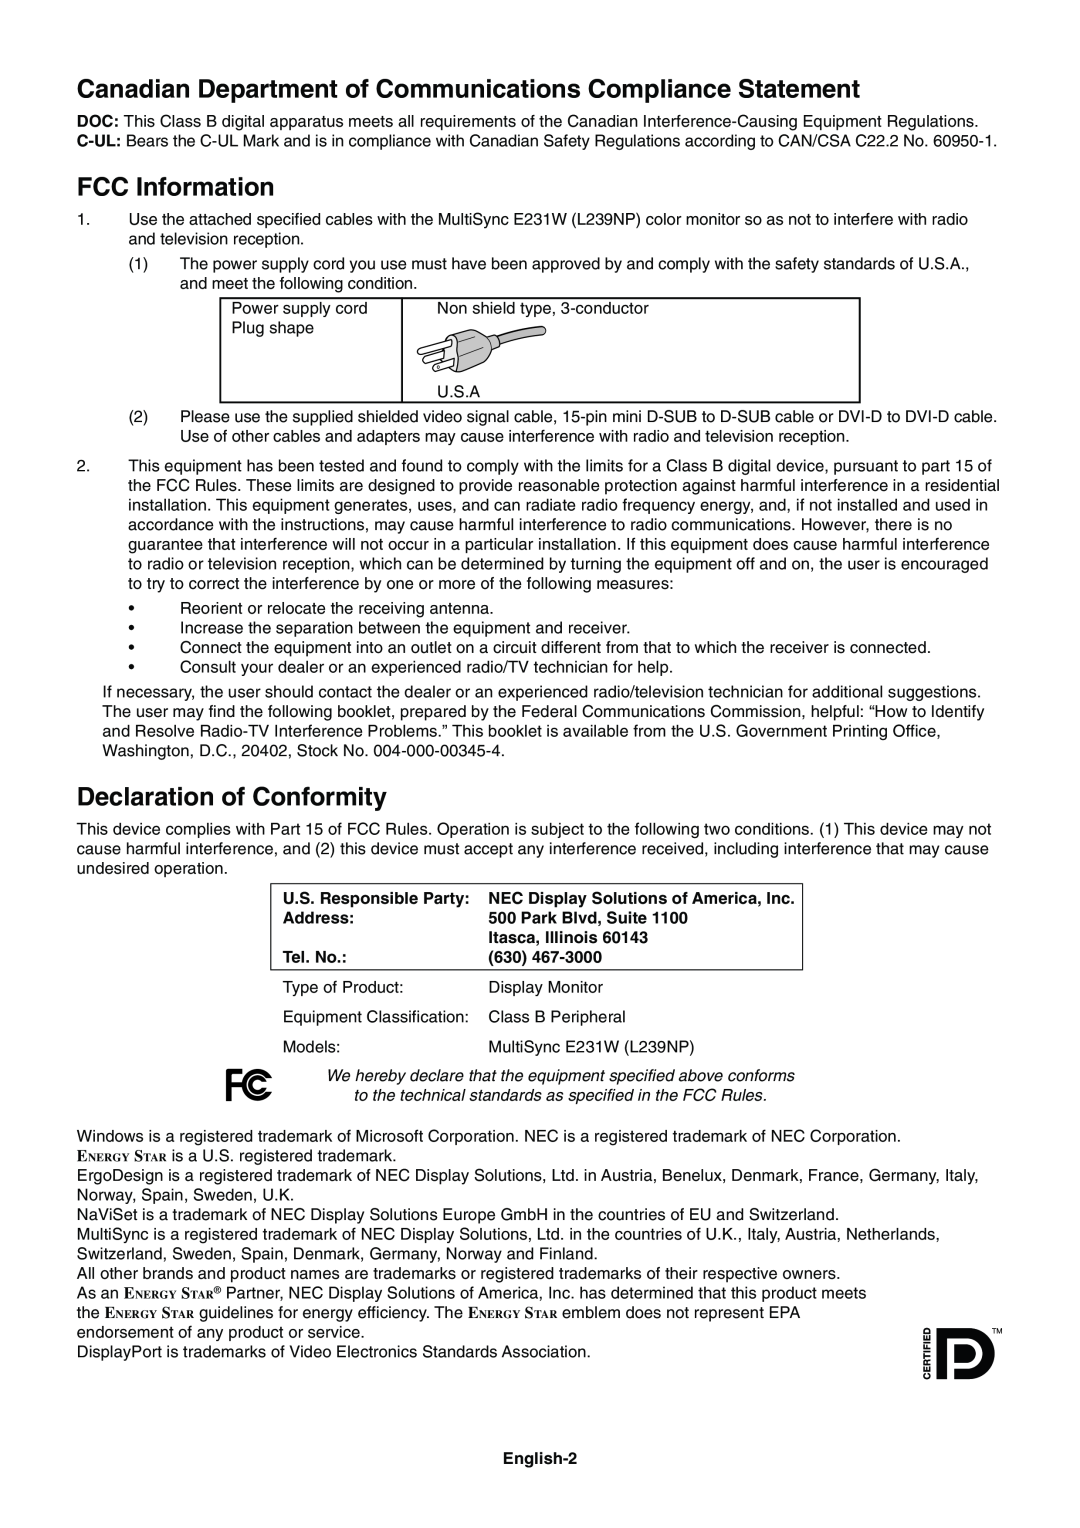 NEC E231W-BK Canadian Department of Communications Compliance Statement, FCC Information, Declaration of Conformity 